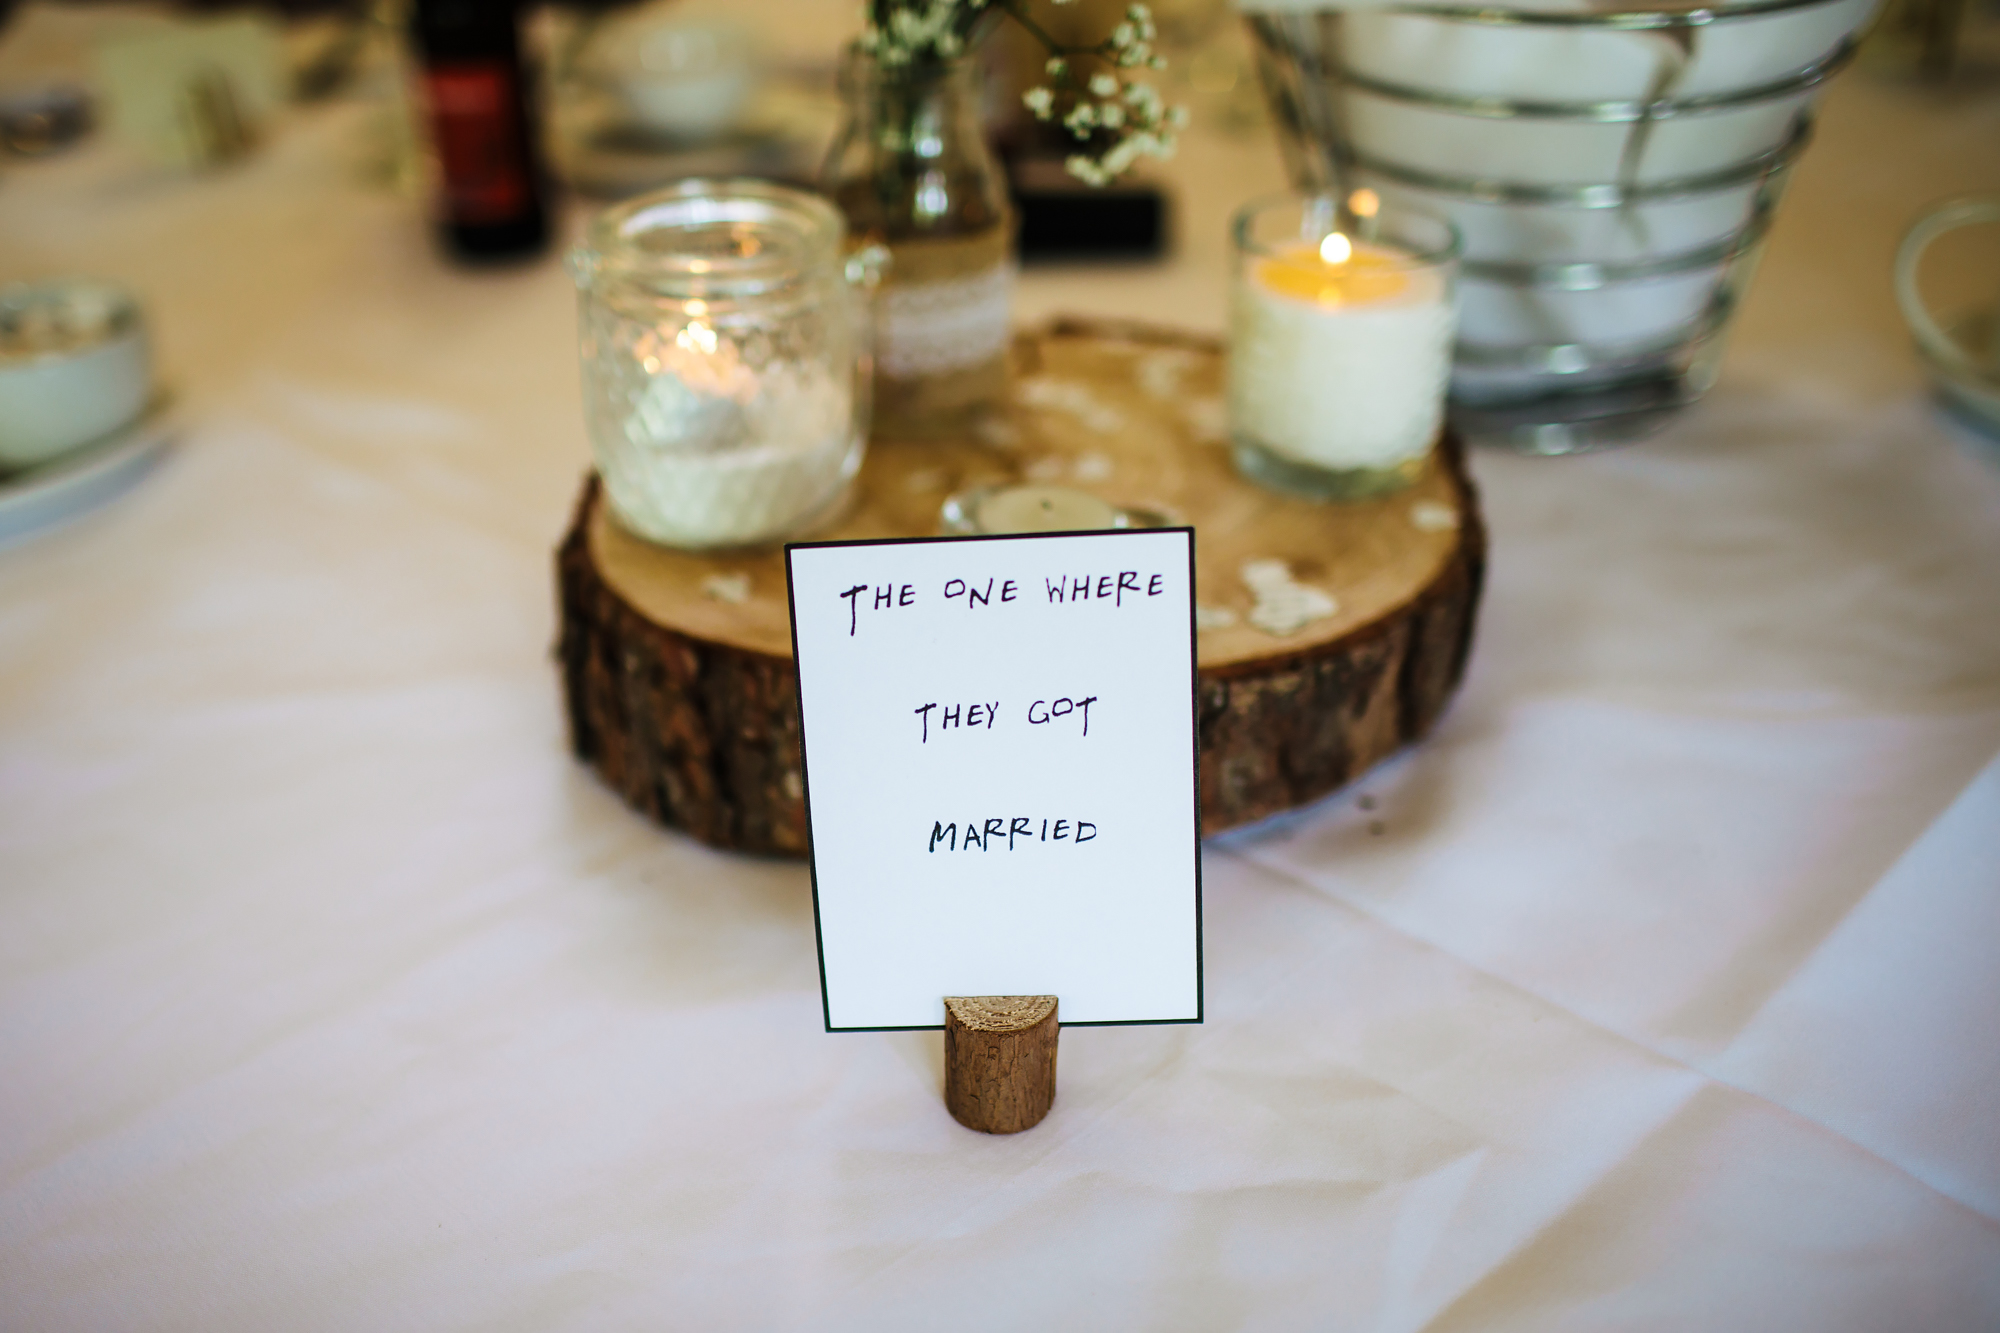 Friends table decorations at a wedding